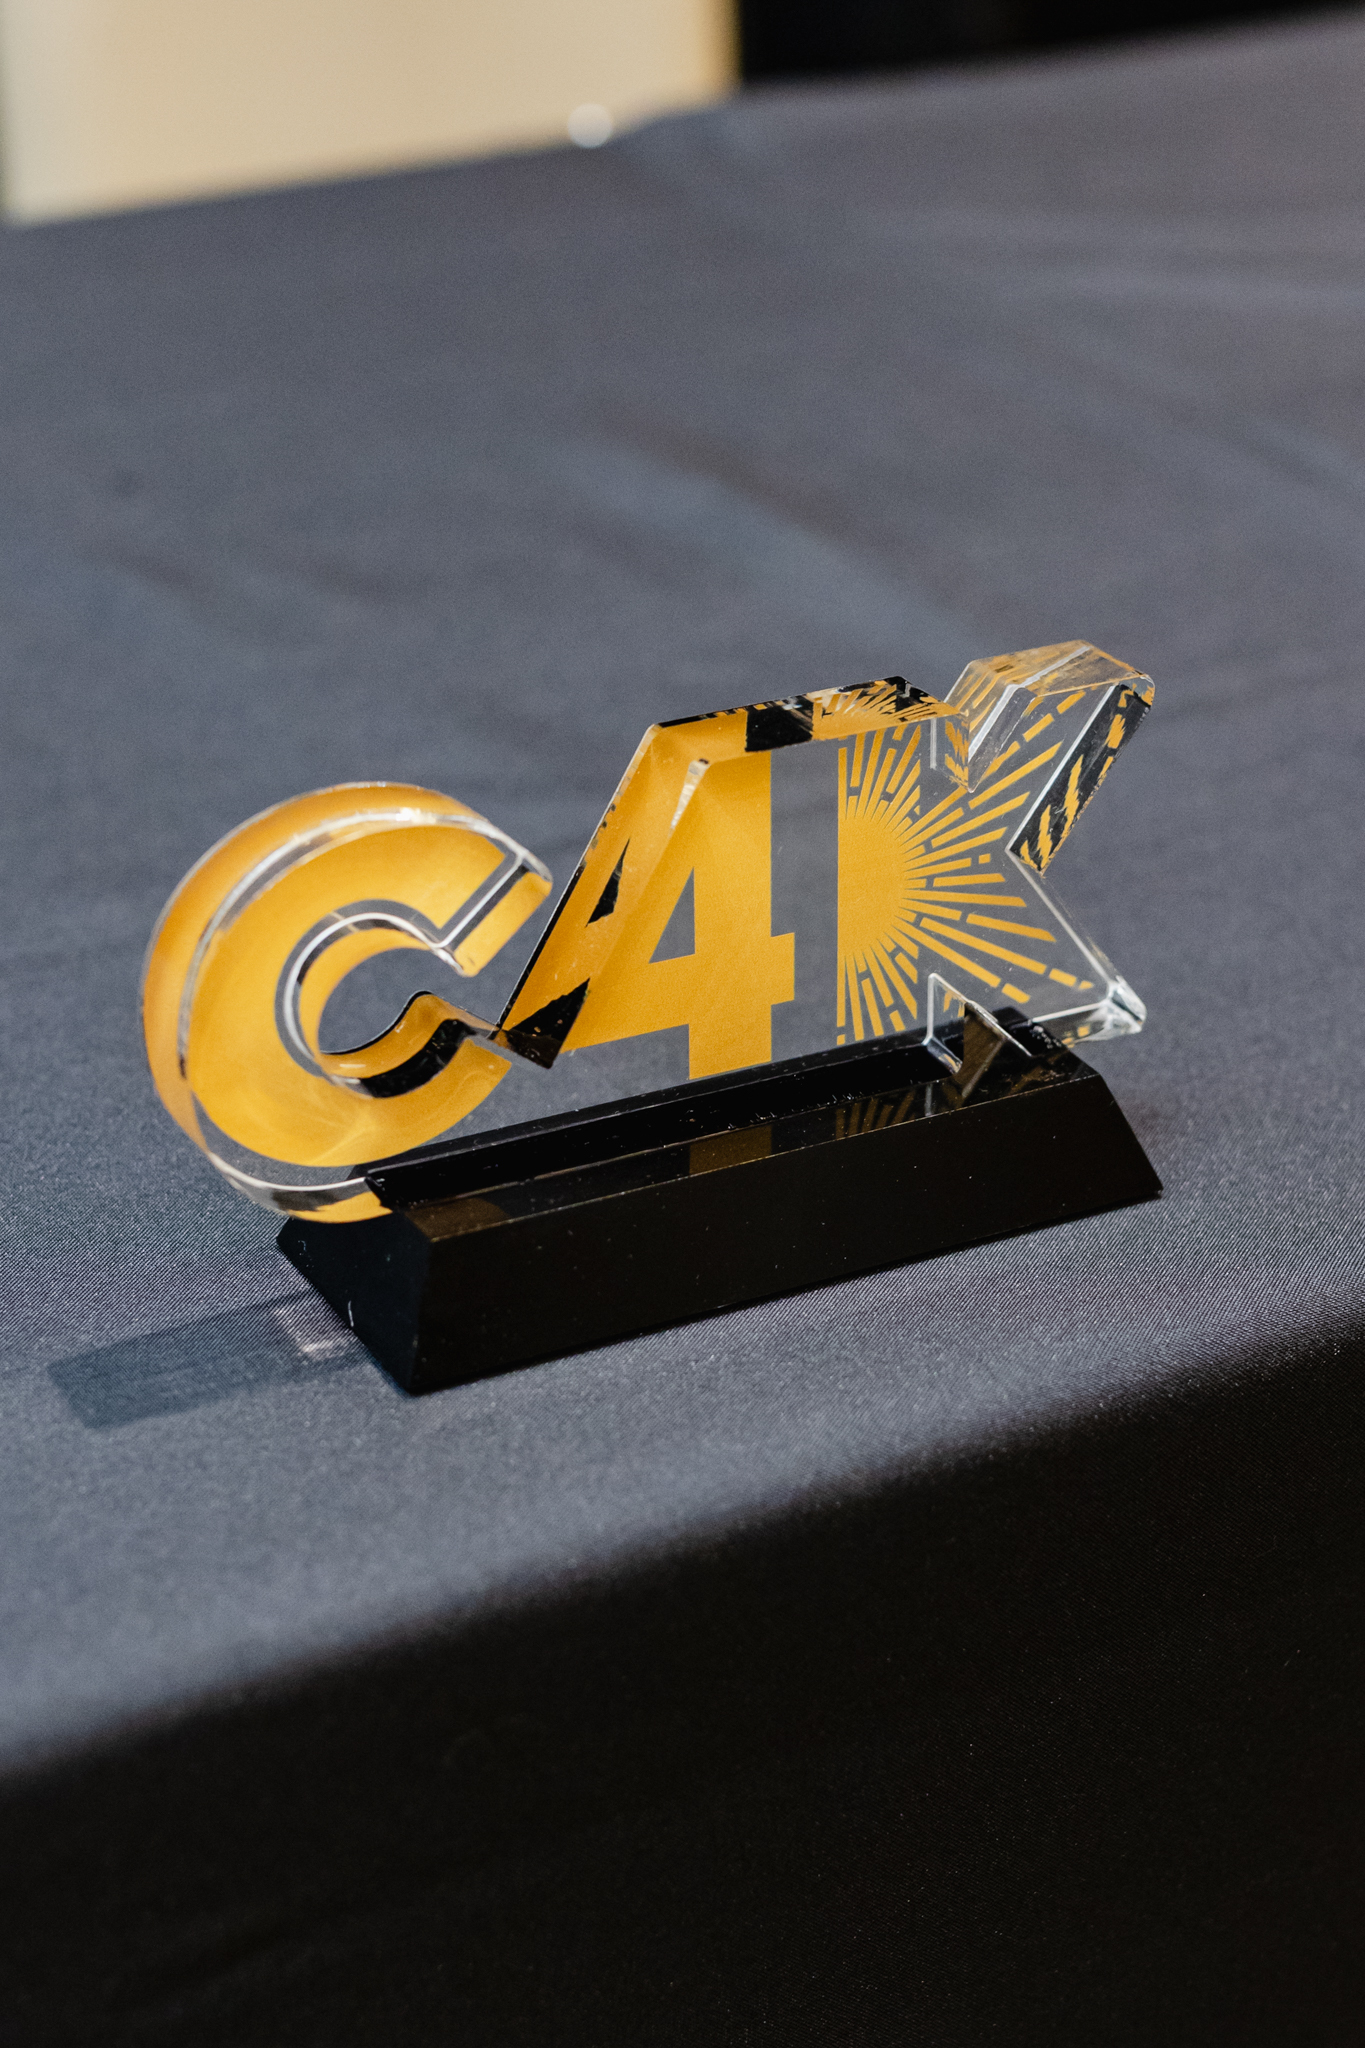 The c4k award is sitting on top of a conference table.